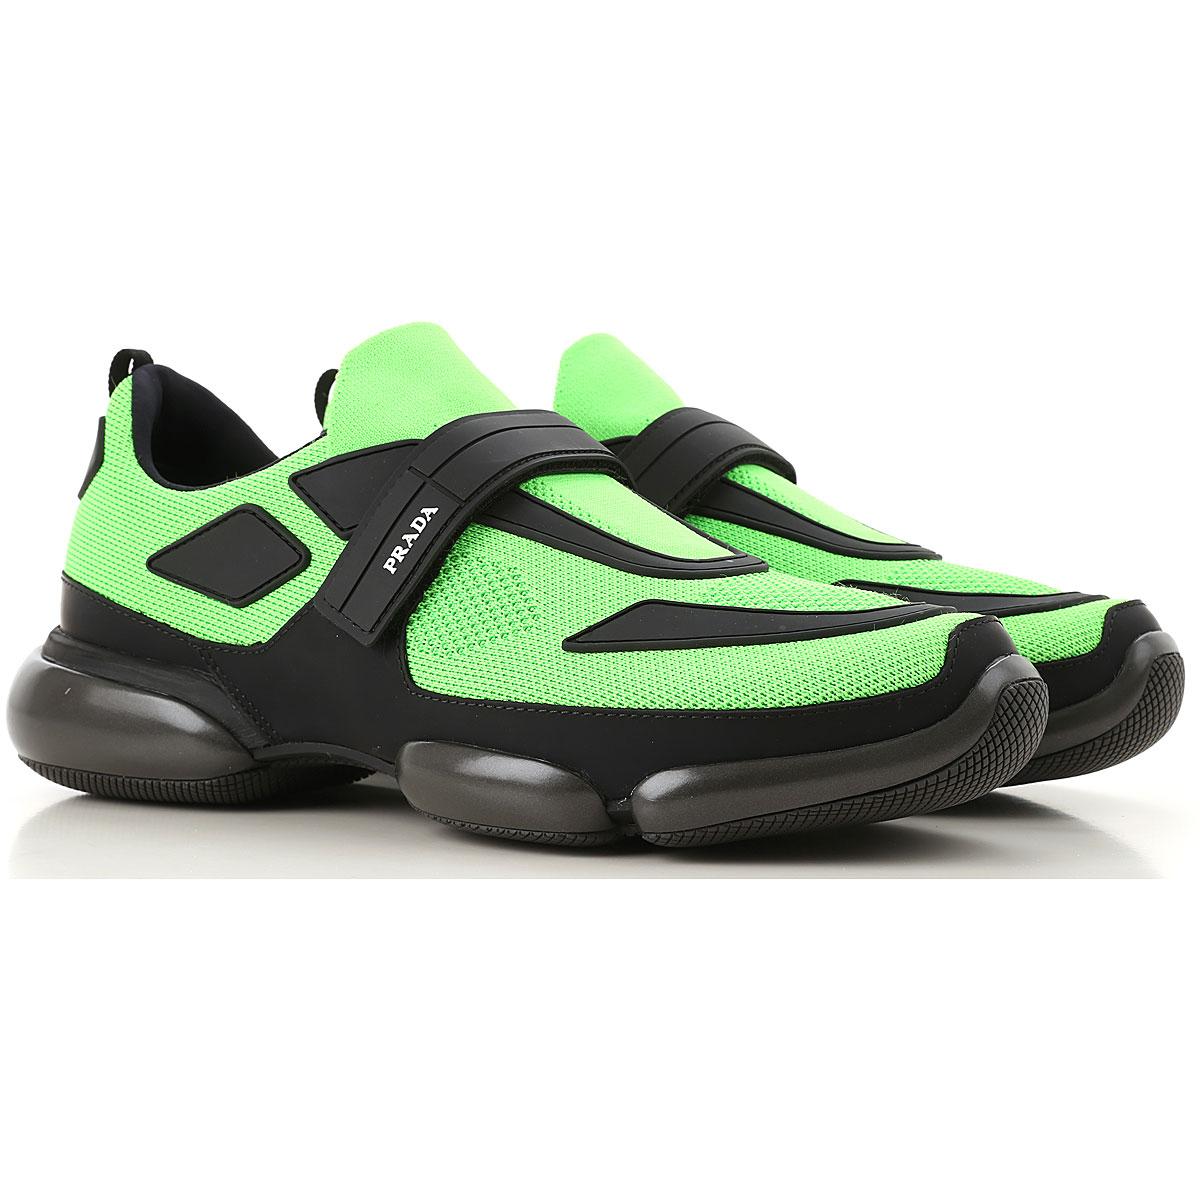 Prada Leather Sneakers For Men On Sale in Green for Men - Lyst